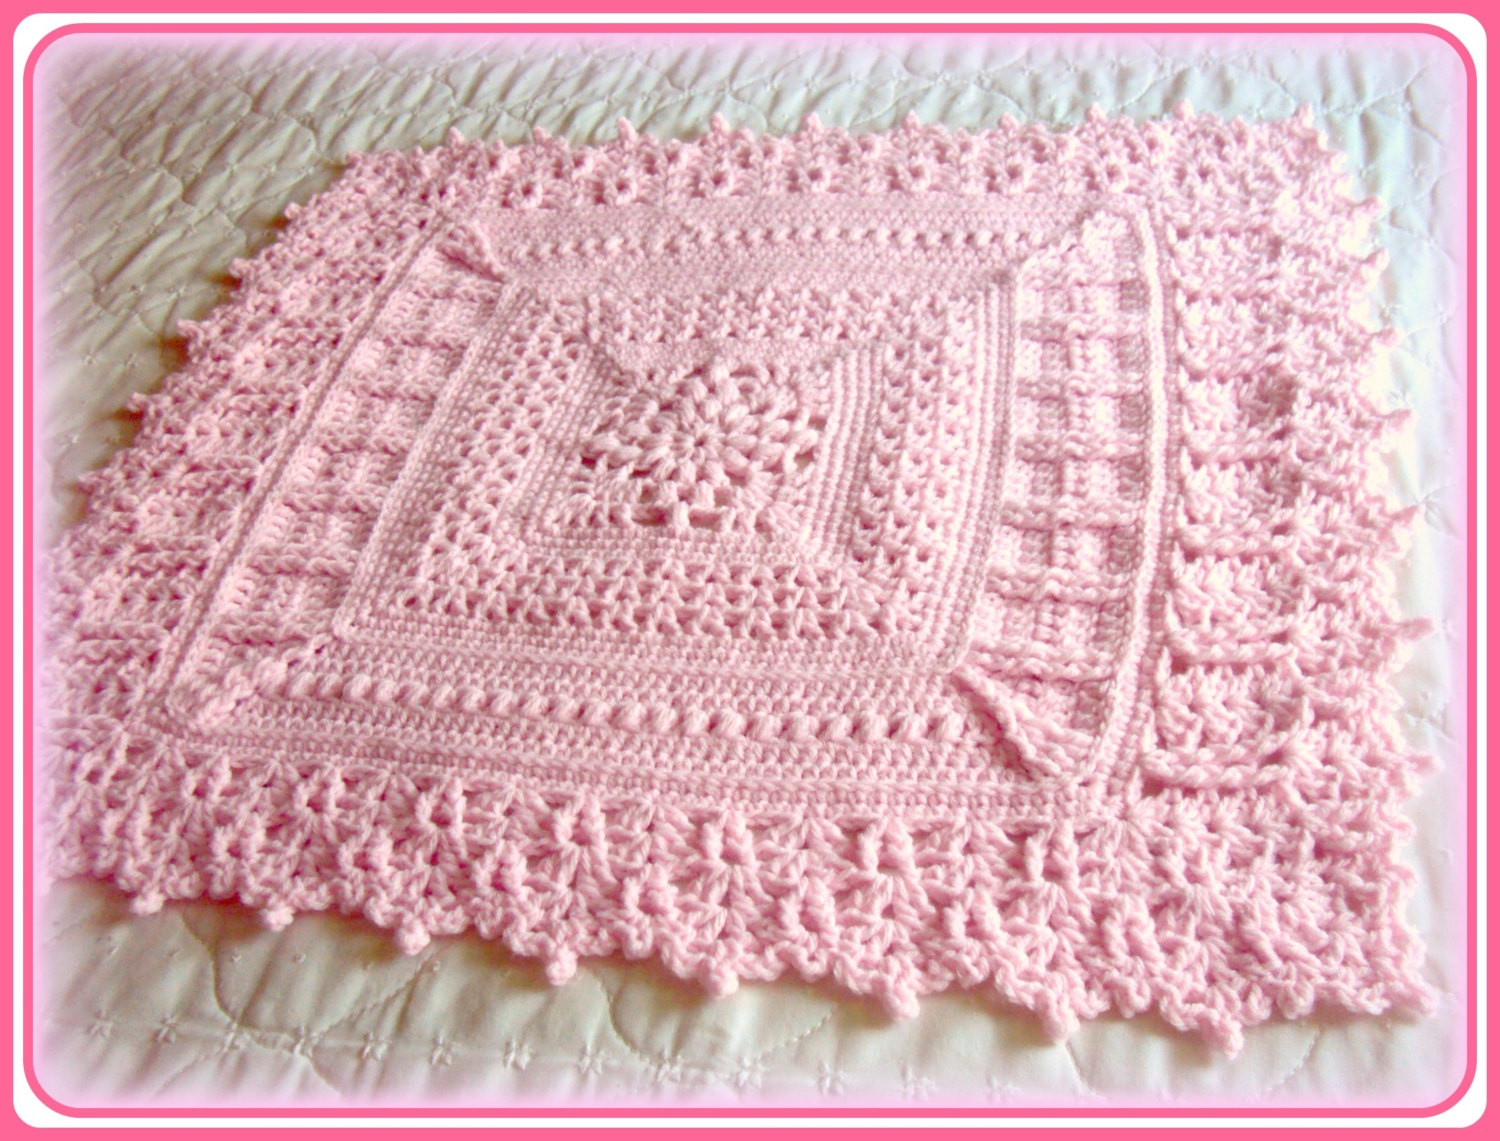 Crochet Baby Afghan Patterns Ba Blankets Patterns Free Crochet Blanket For Beginners And Knit